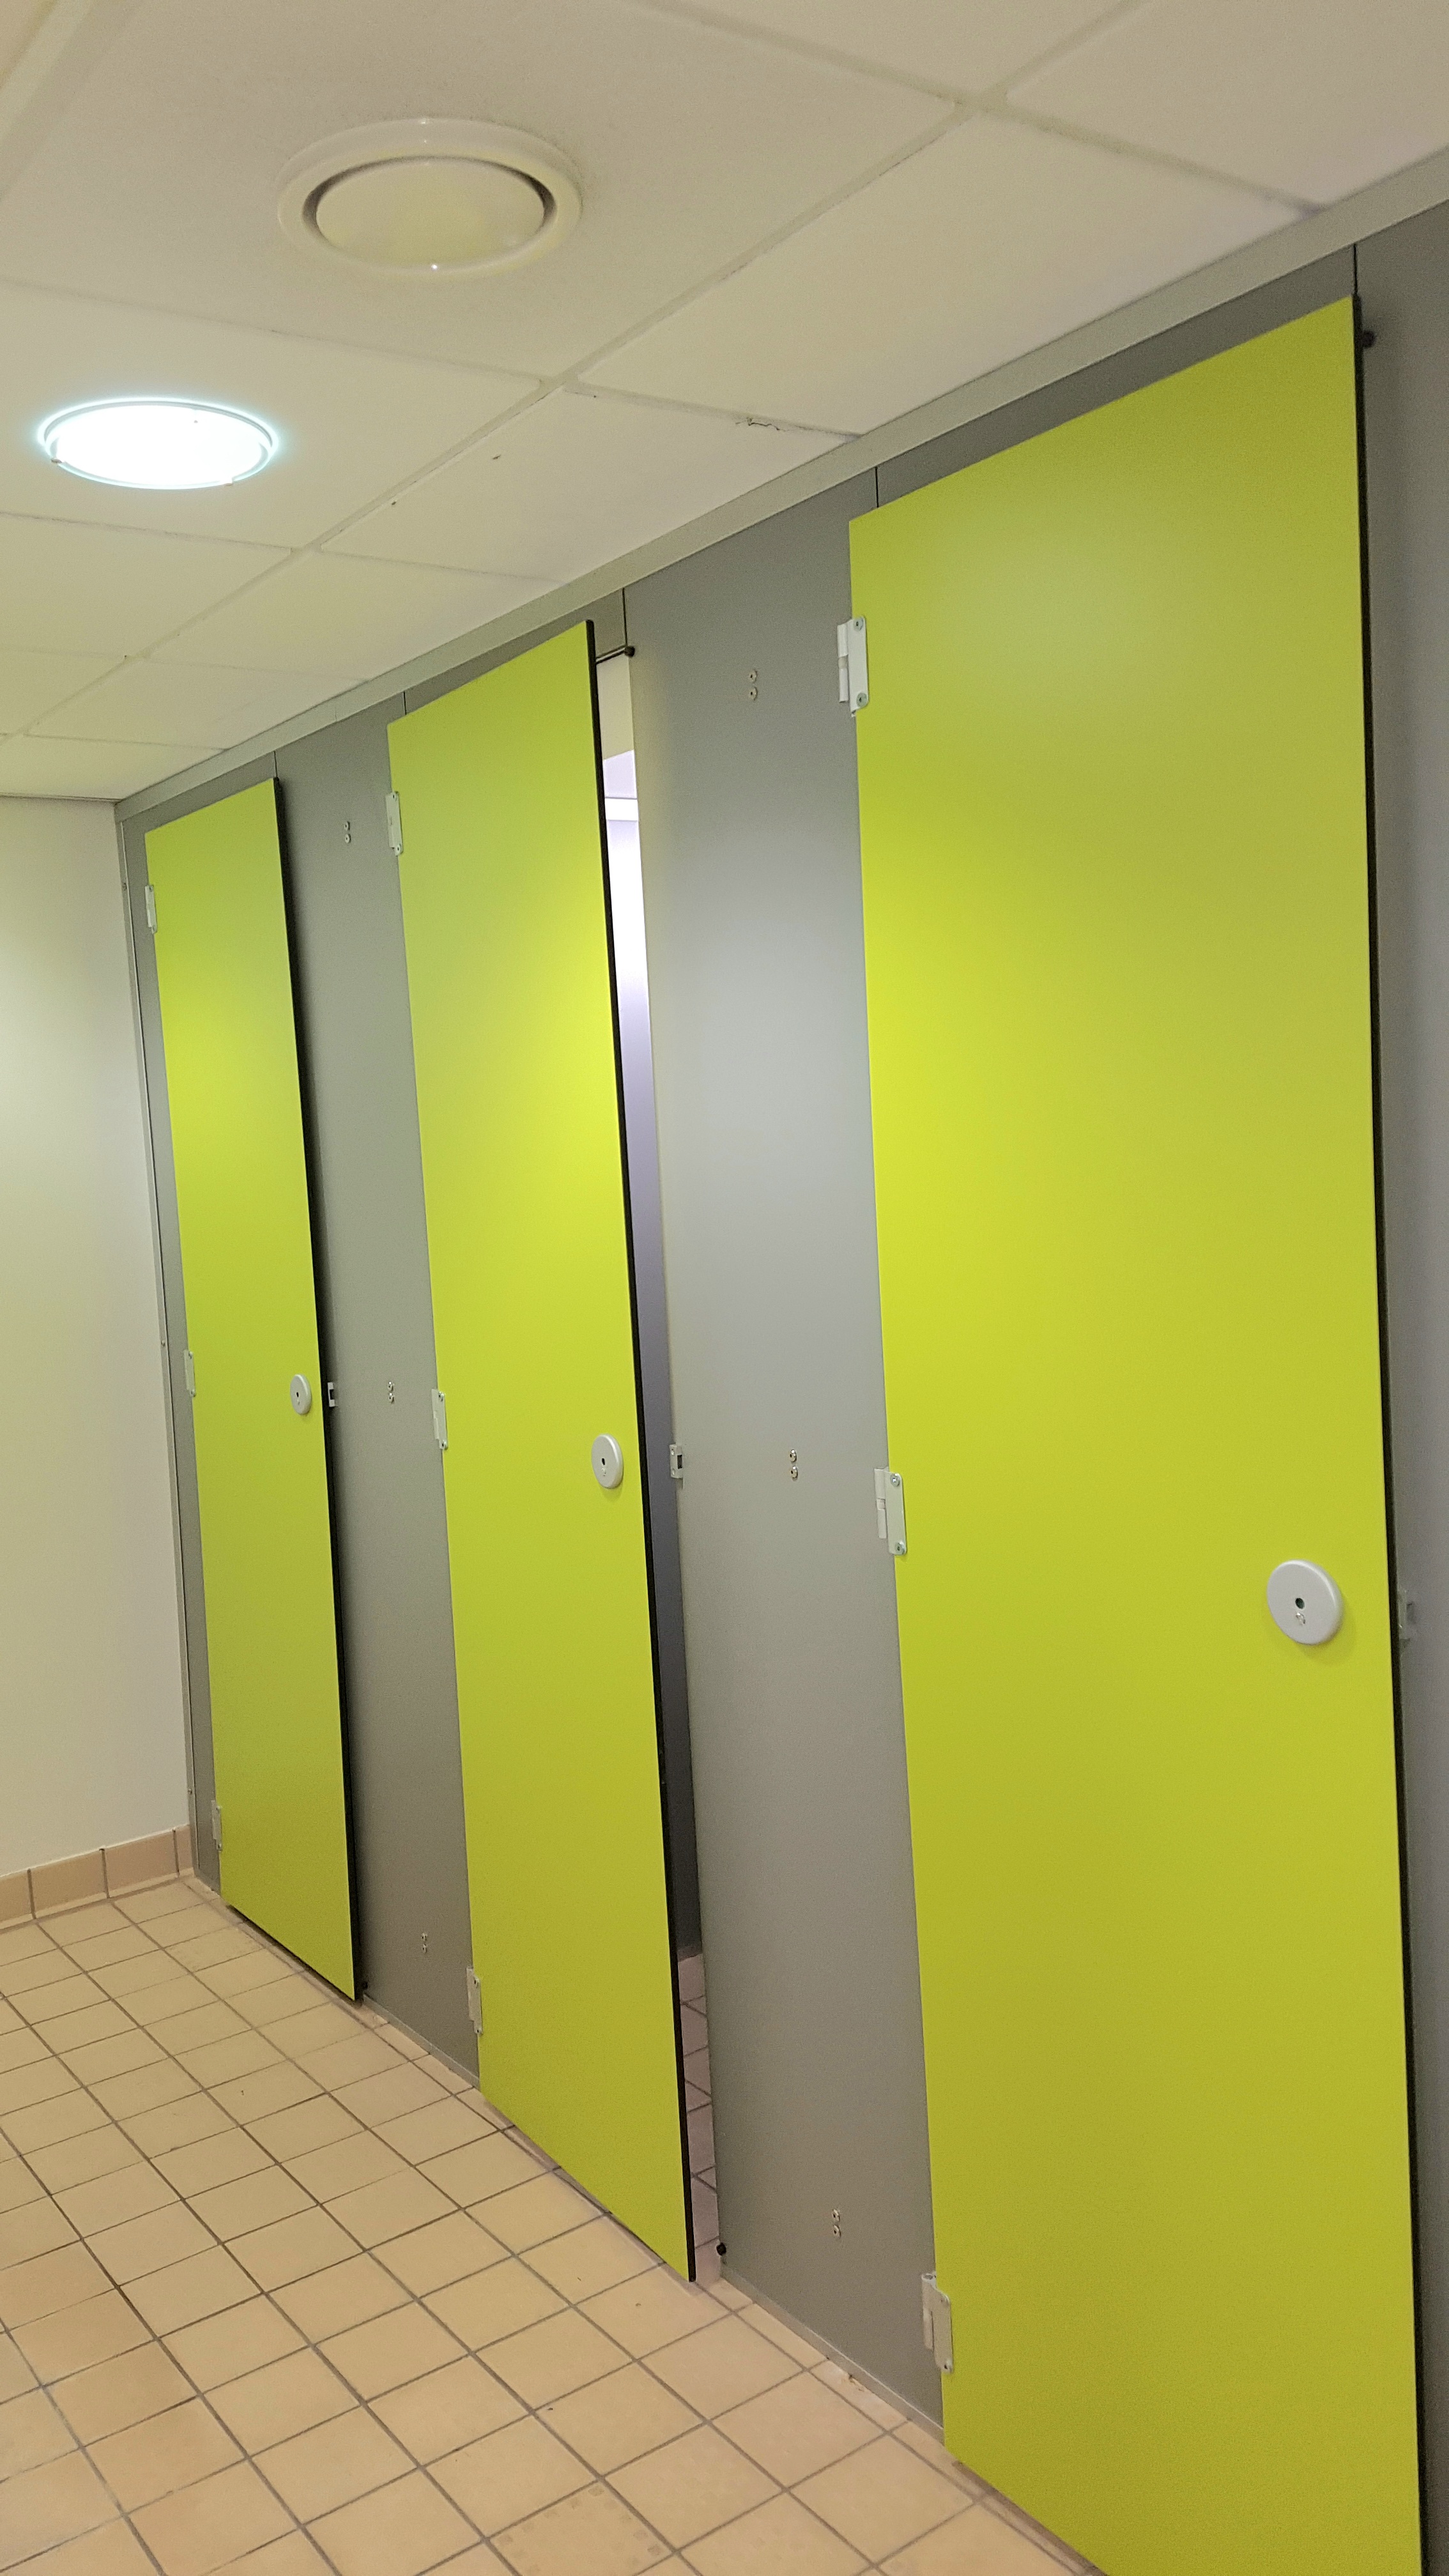 Changing room cubicle installation